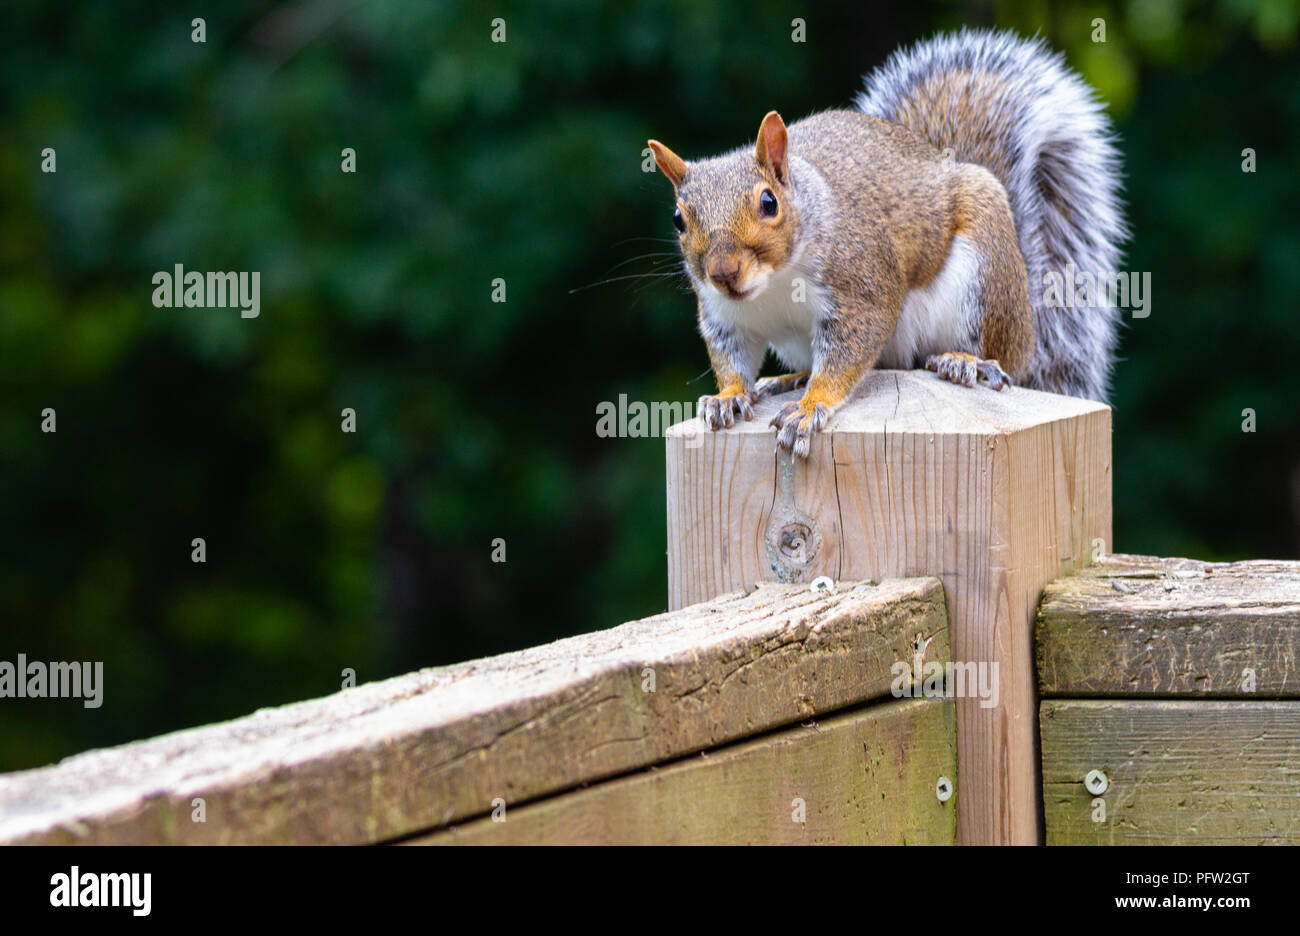 Close up of one grey squirrel perched on a wooden deck post eying peanuts outside the frame of the photo, against a blurred green background. Stock Photo